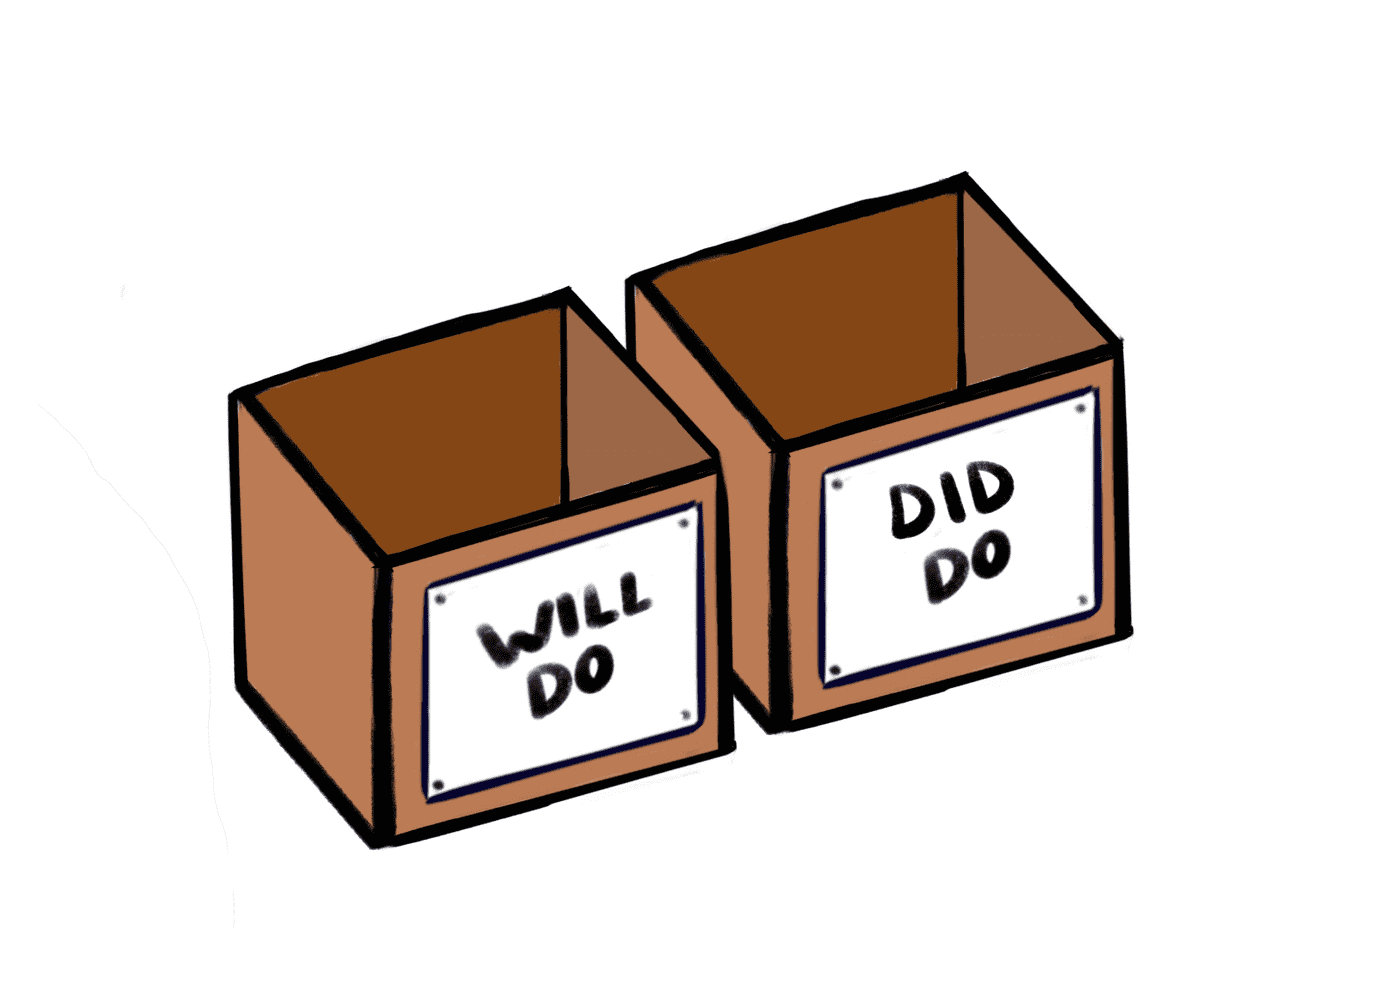 two empty cardboard boxes labeled "WILL DO" and "DID DO"